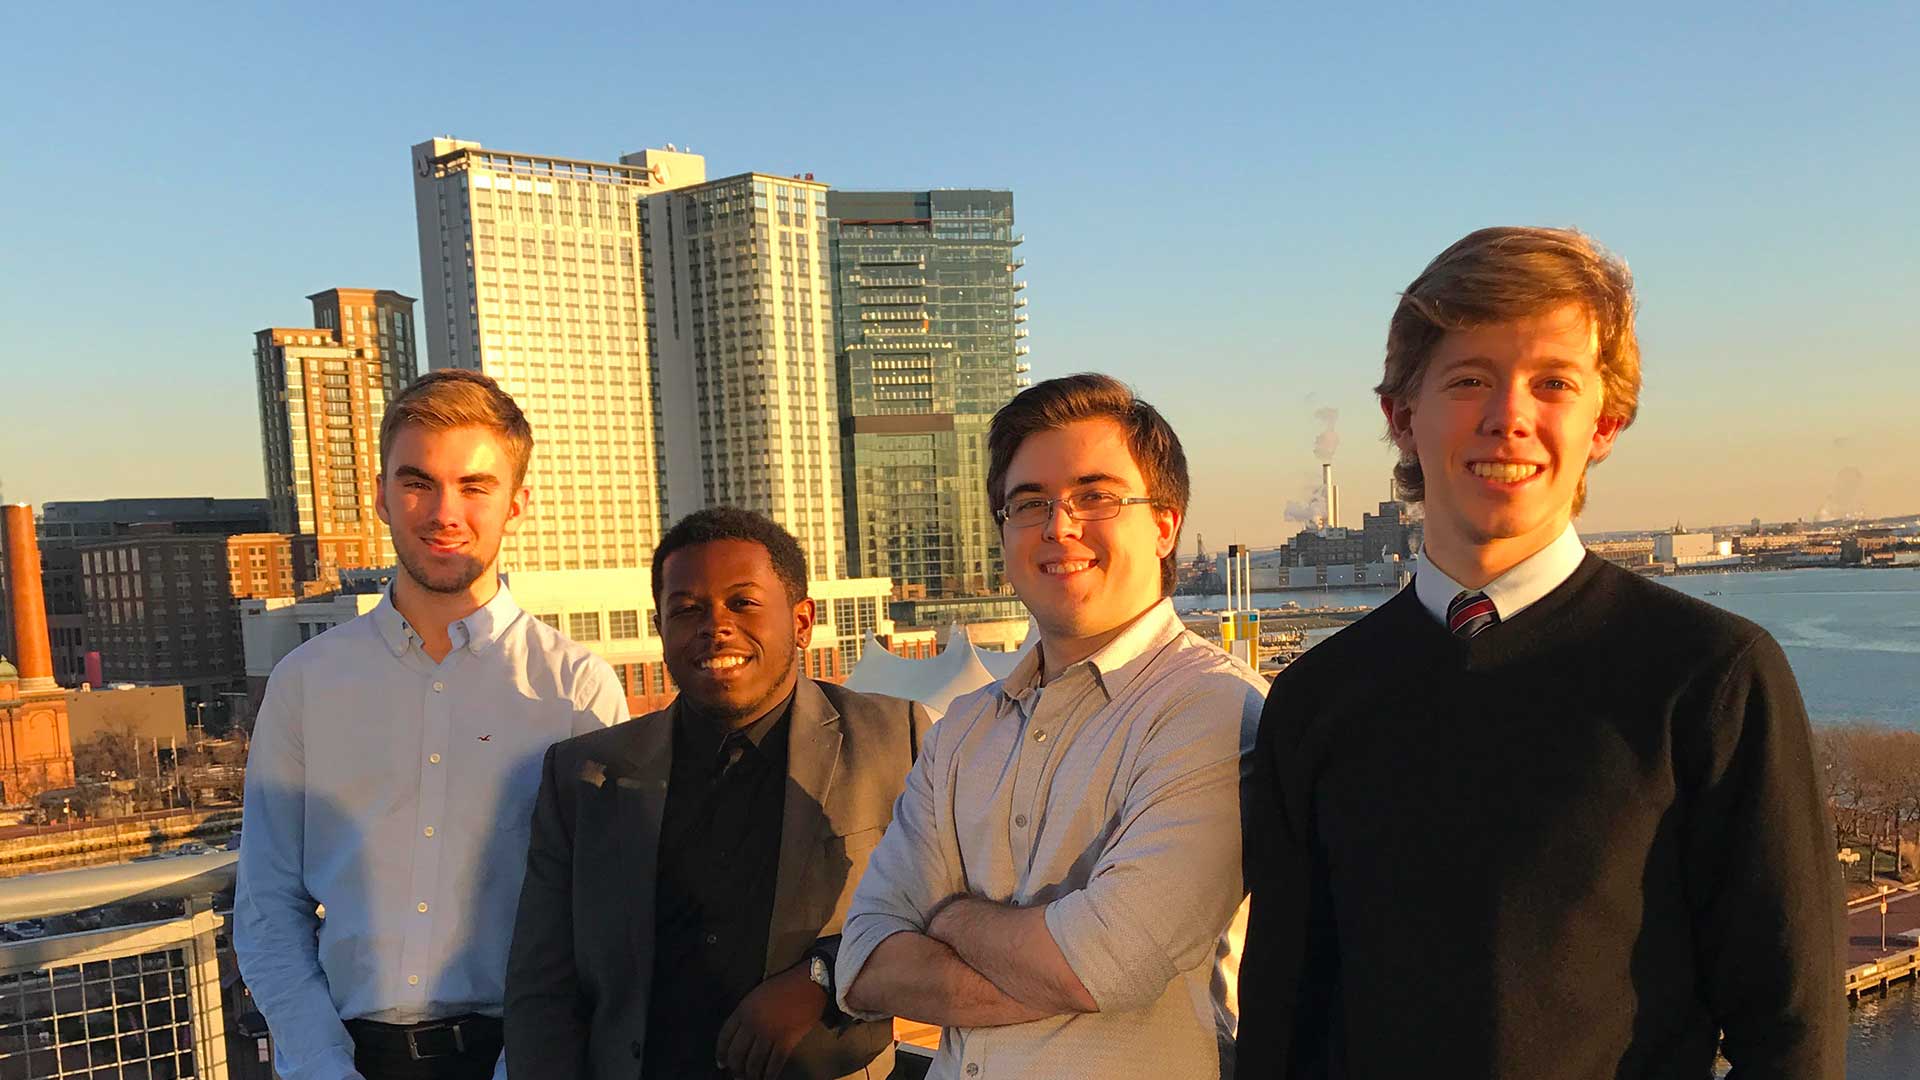 SMCM interns on a rooftop with a city backdrop.